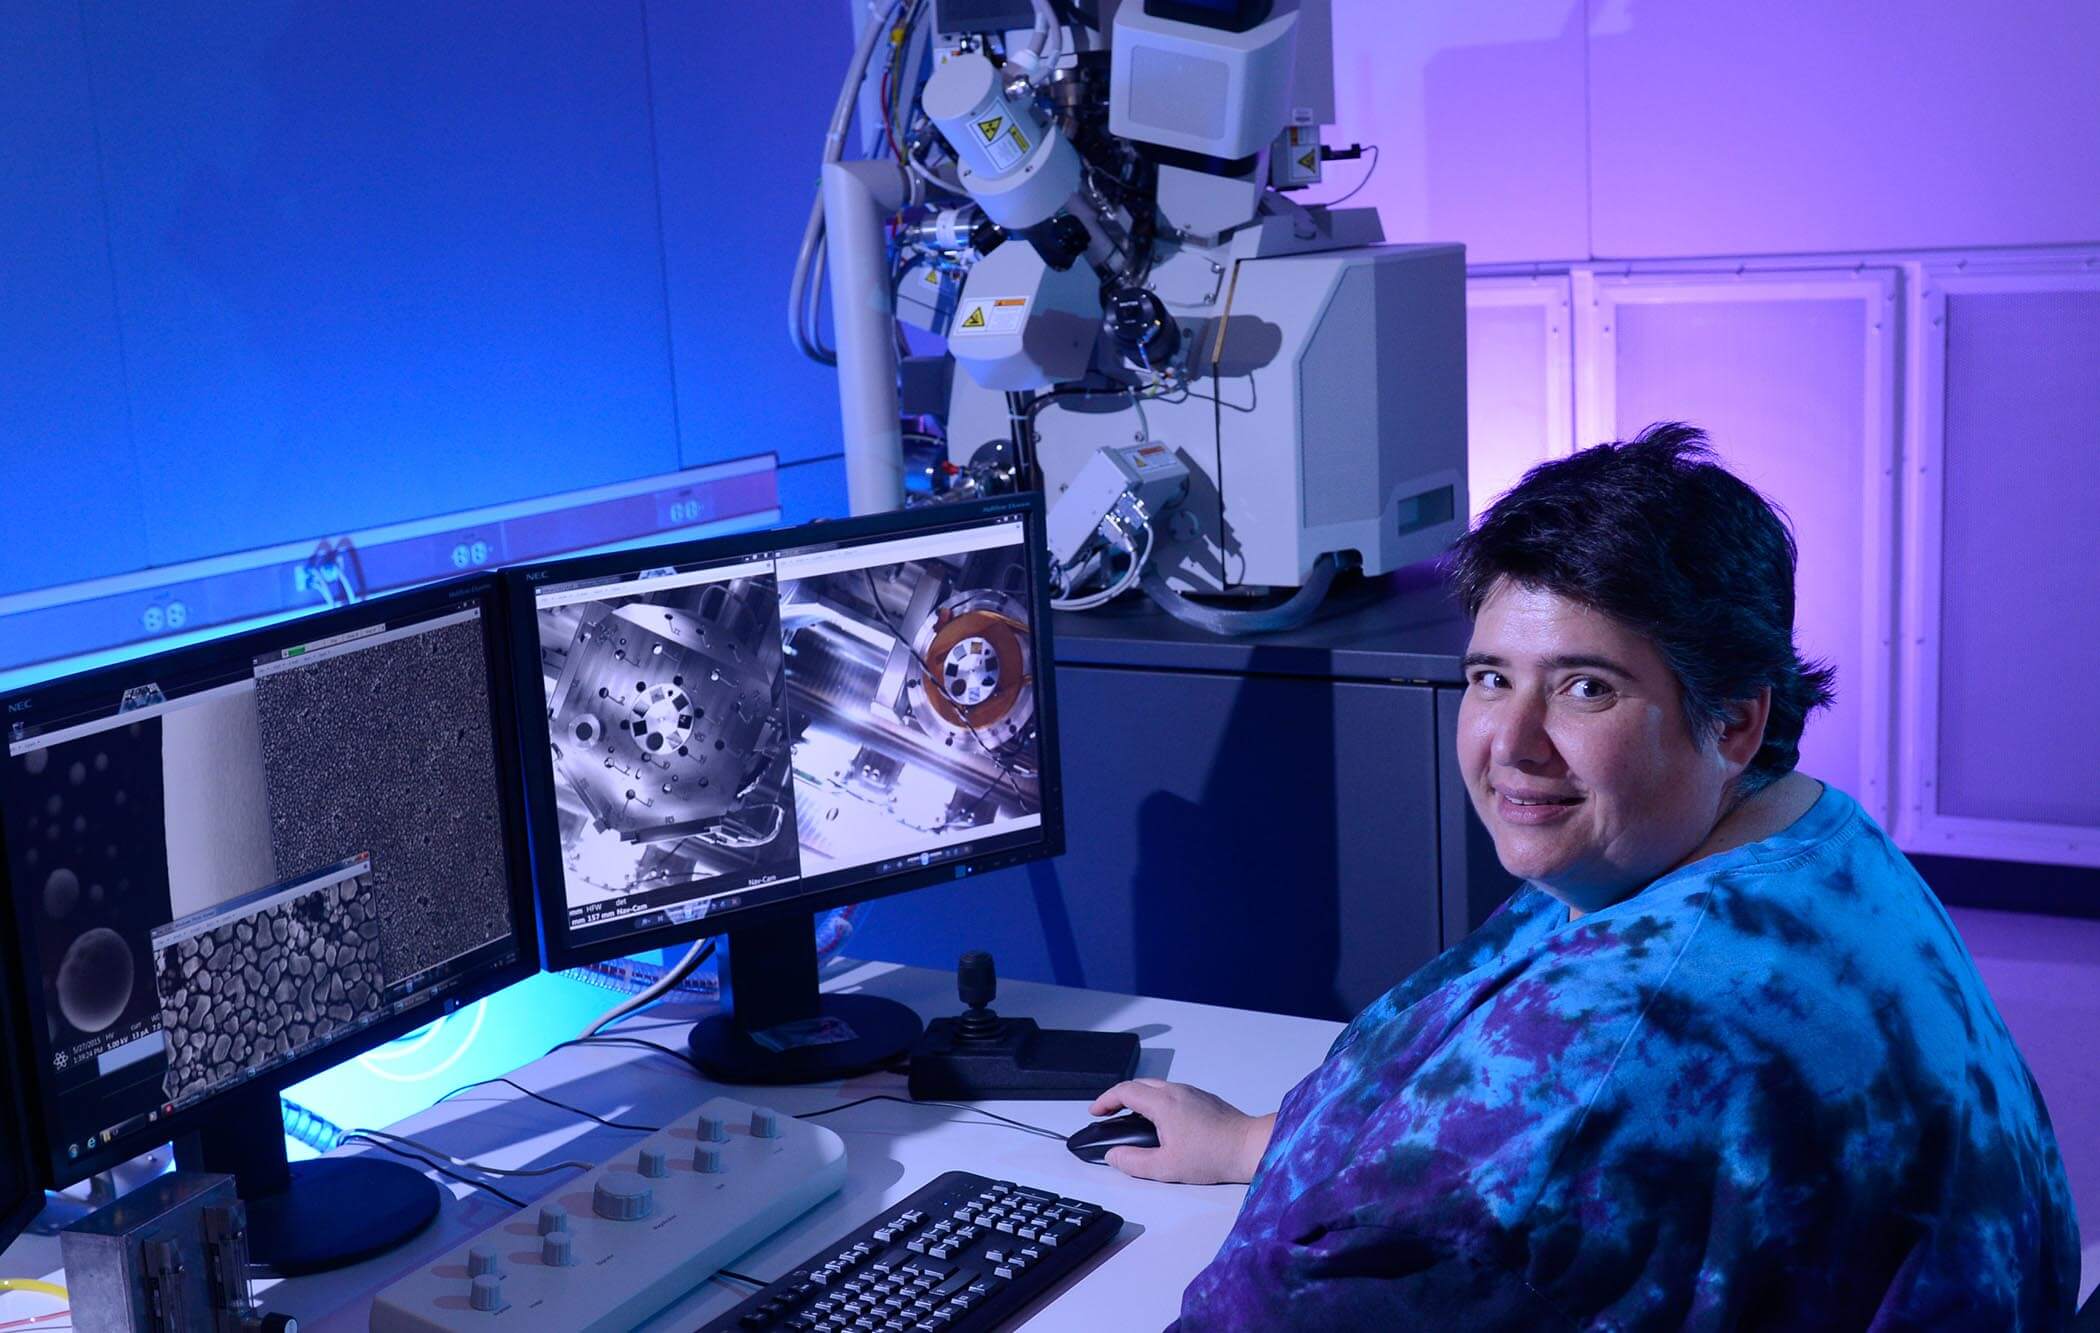 A women looks at the camera and smiles as she work at two monitors in a blue-lit room.